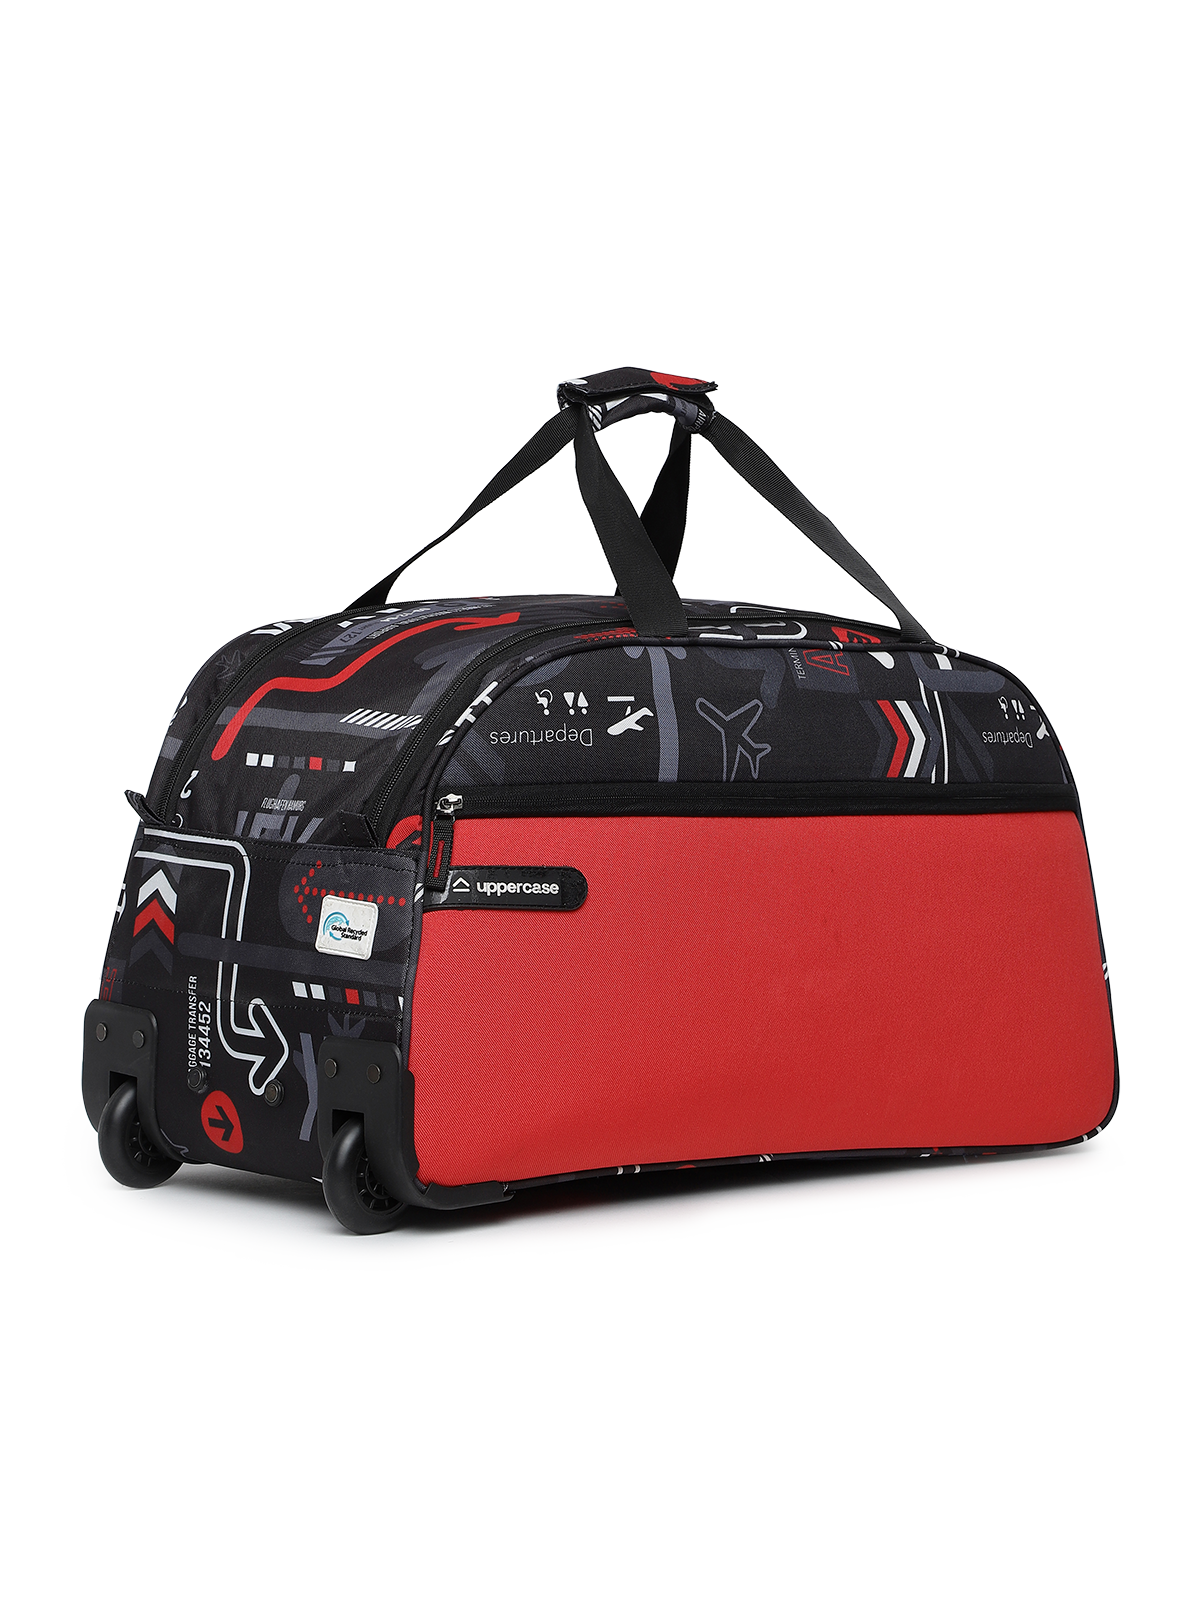 uppercase JFK 62 Duffle Trolley Bag | Dust Resistant Travel Bag | Spacious Main Compartment | Smooth Wheels | Quick Front Pocket Access | Duffle Bag for Women & Men | 1500 Days Warranty (Red)